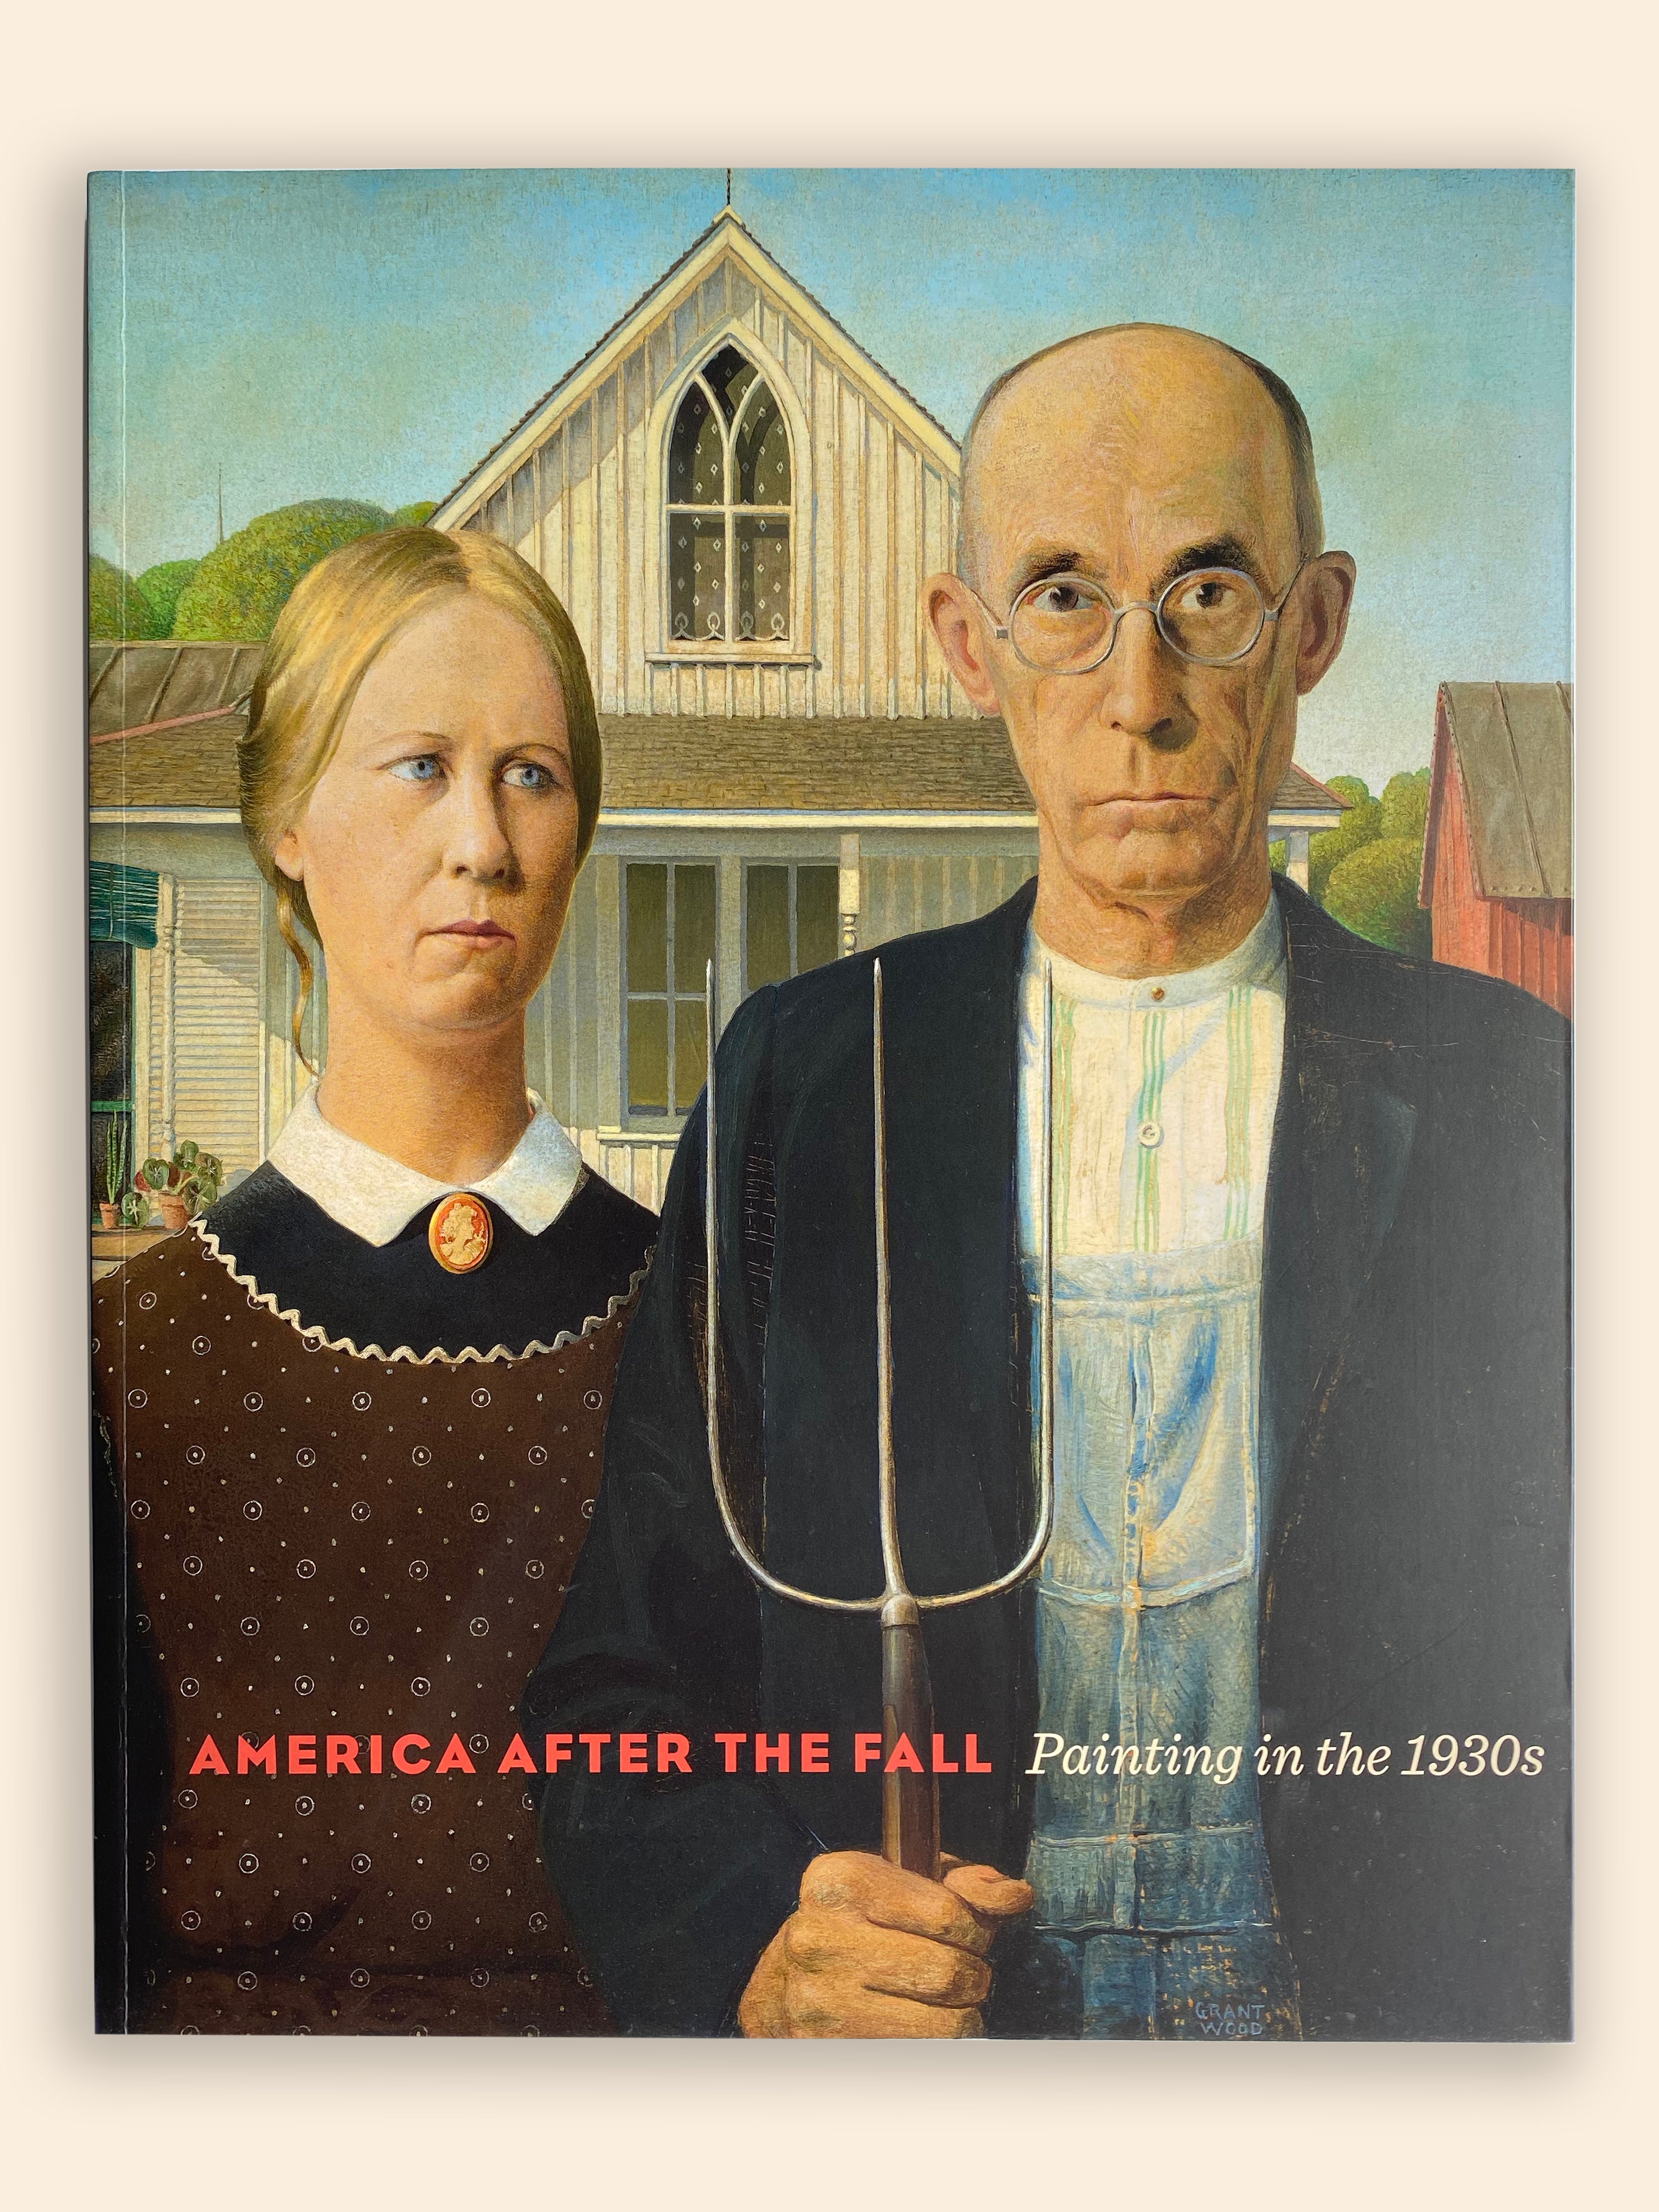 America After The Fall | Painting In The 1930s